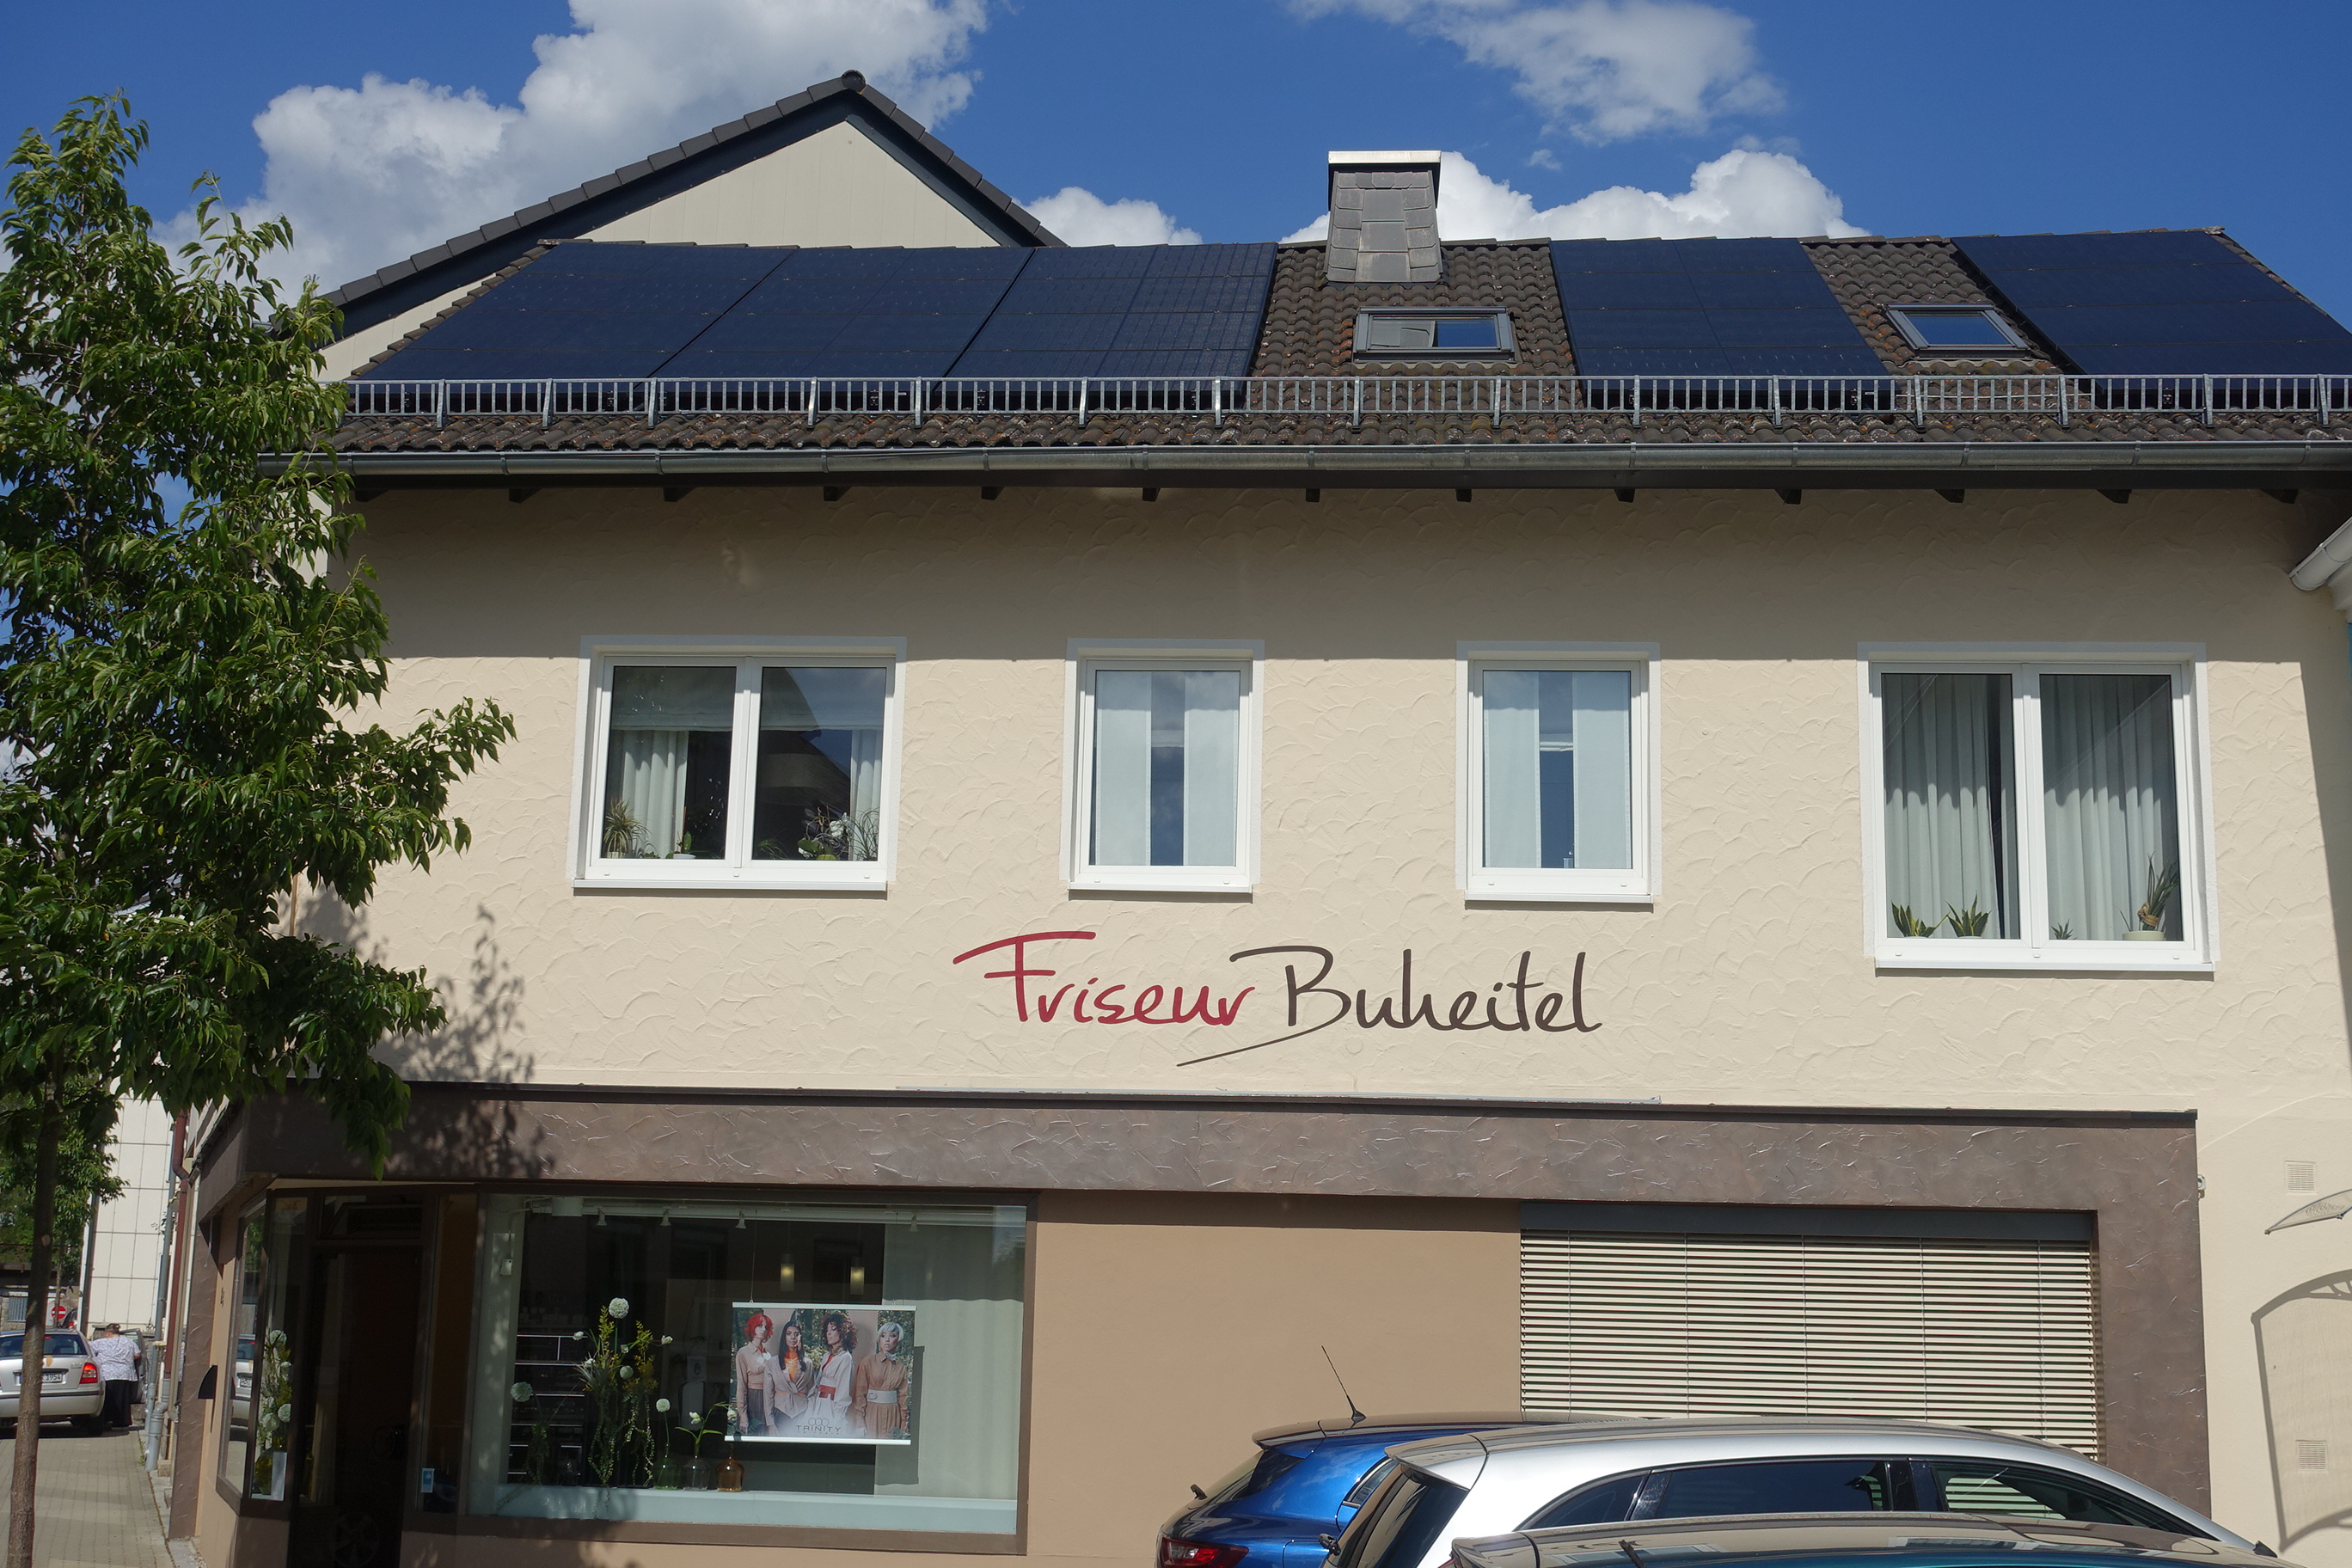 PV Haus Frontansicht